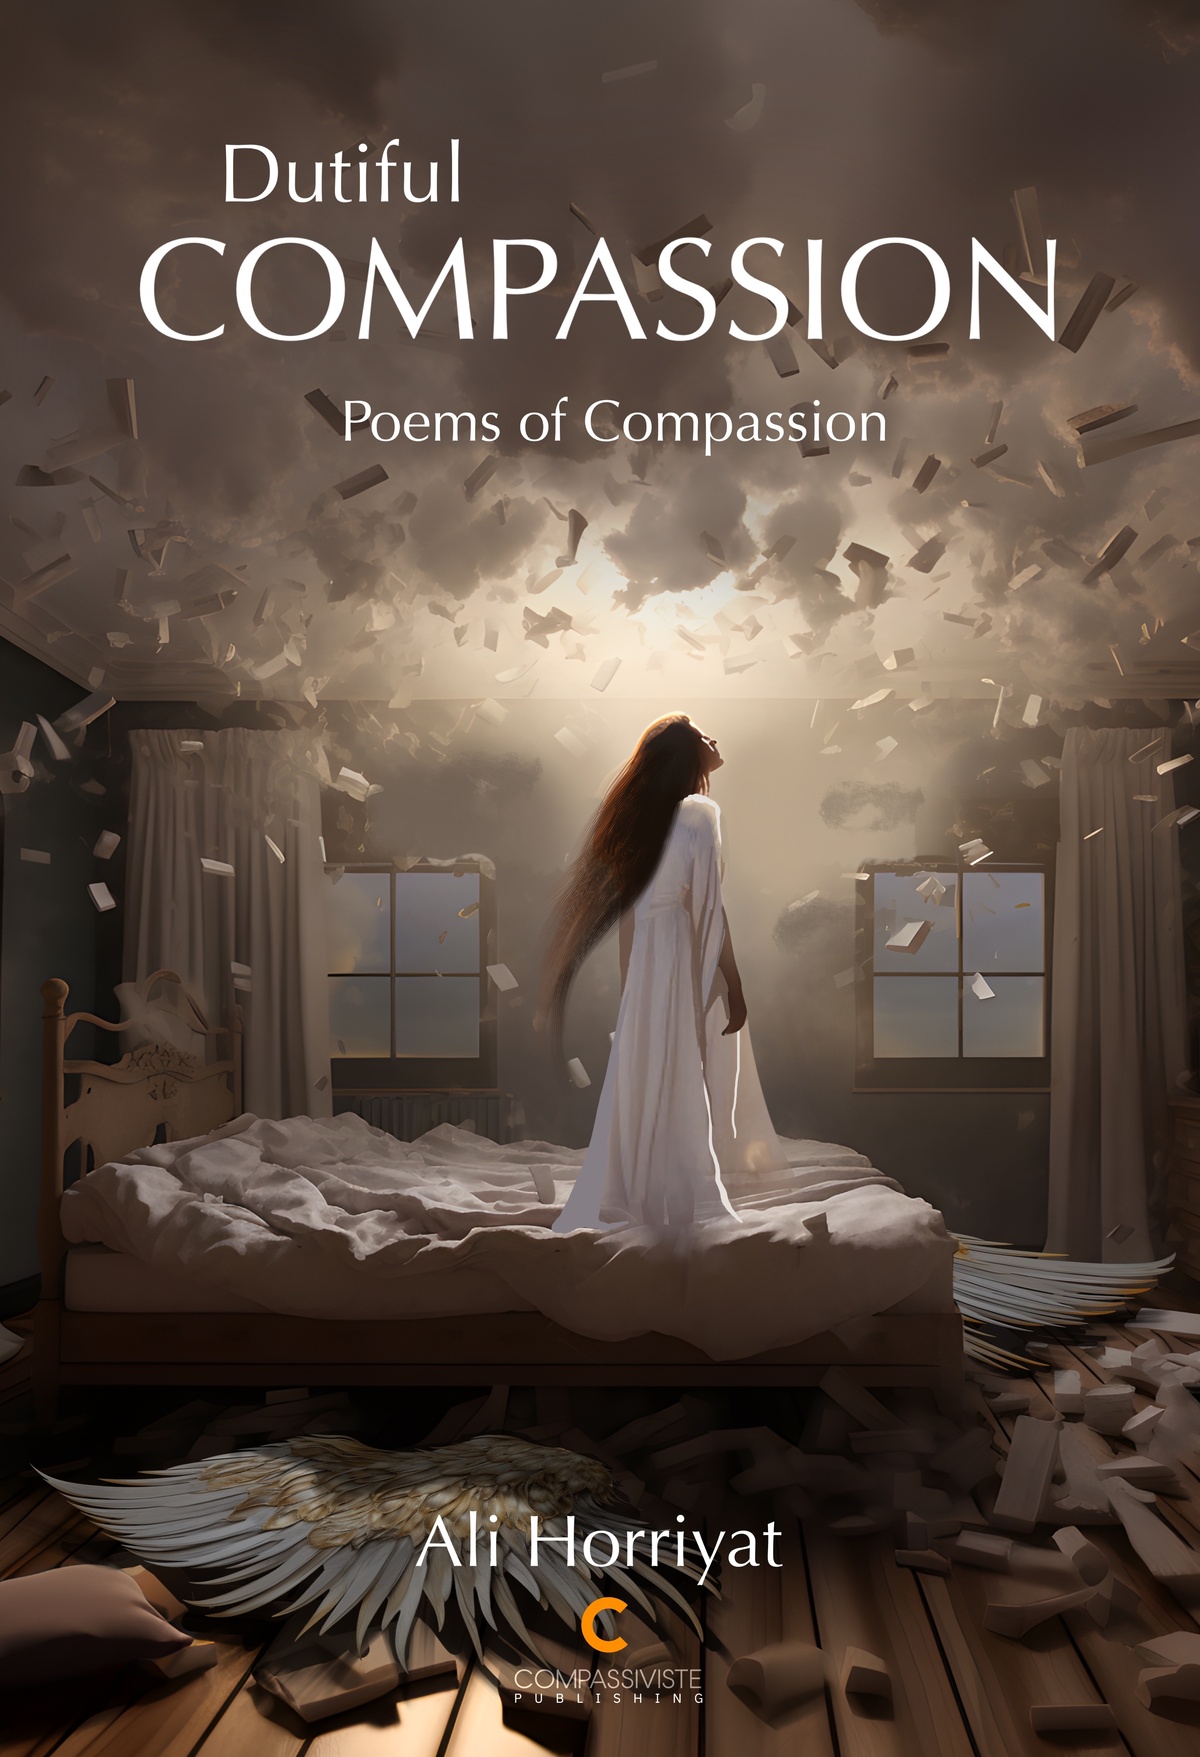 Book cover of Dutiful Compassion by Ali Horriyat